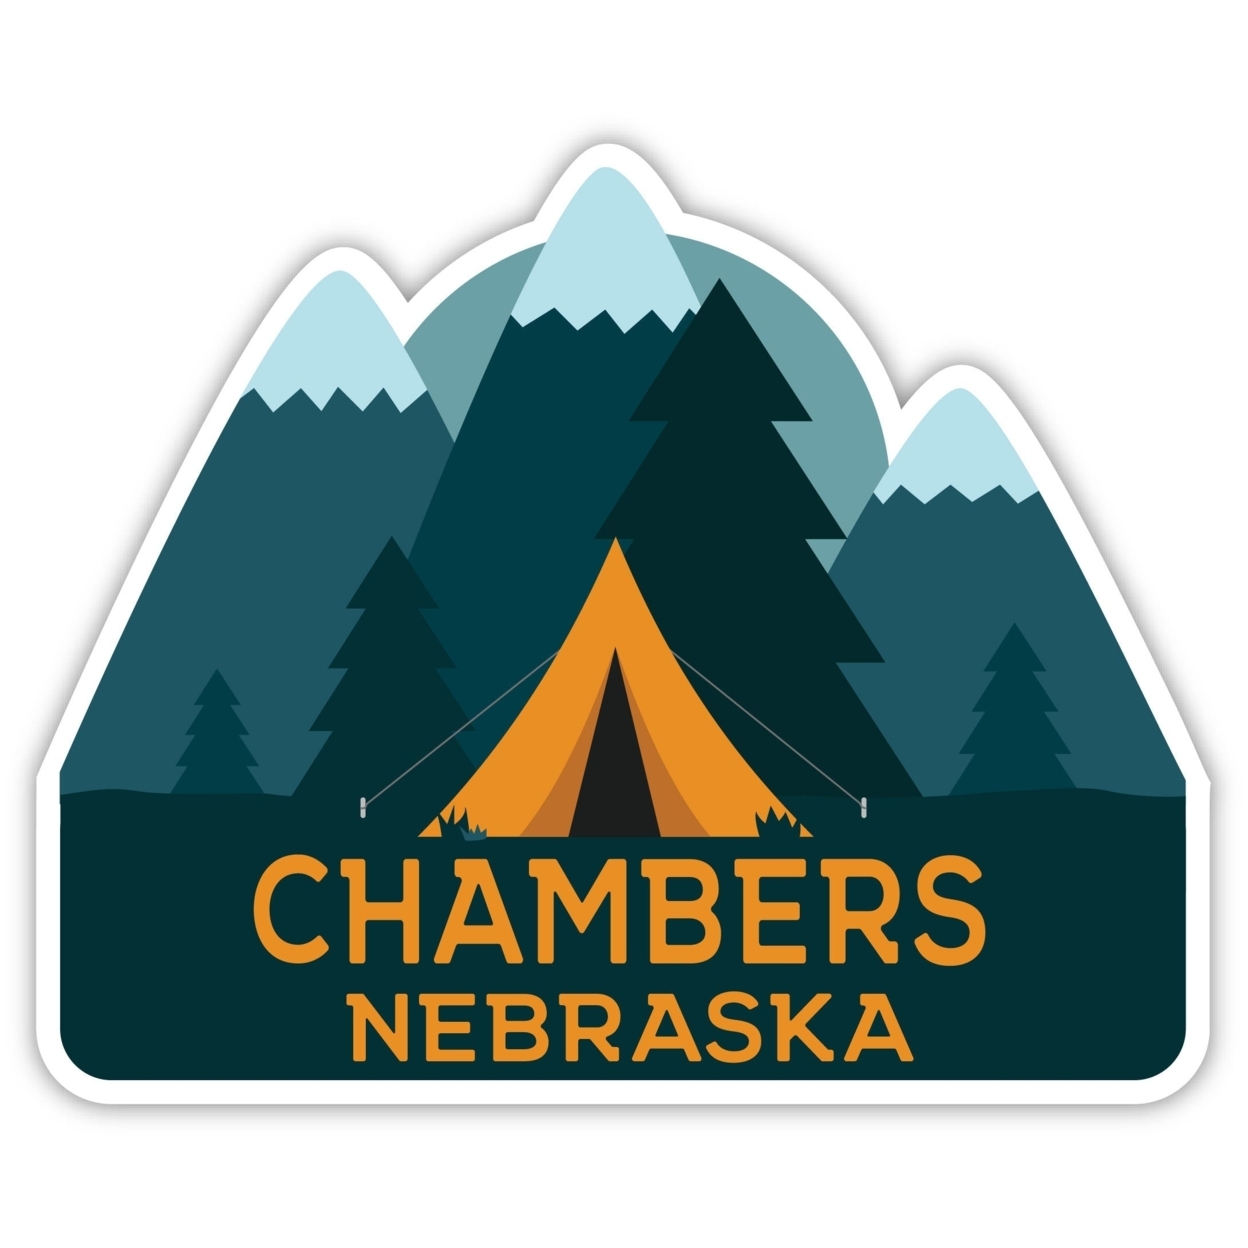 Chambers Nebraska Souvenir Decorative Stickers (Choose Theme And Size) - 4-Pack, 4-Inch, Tent